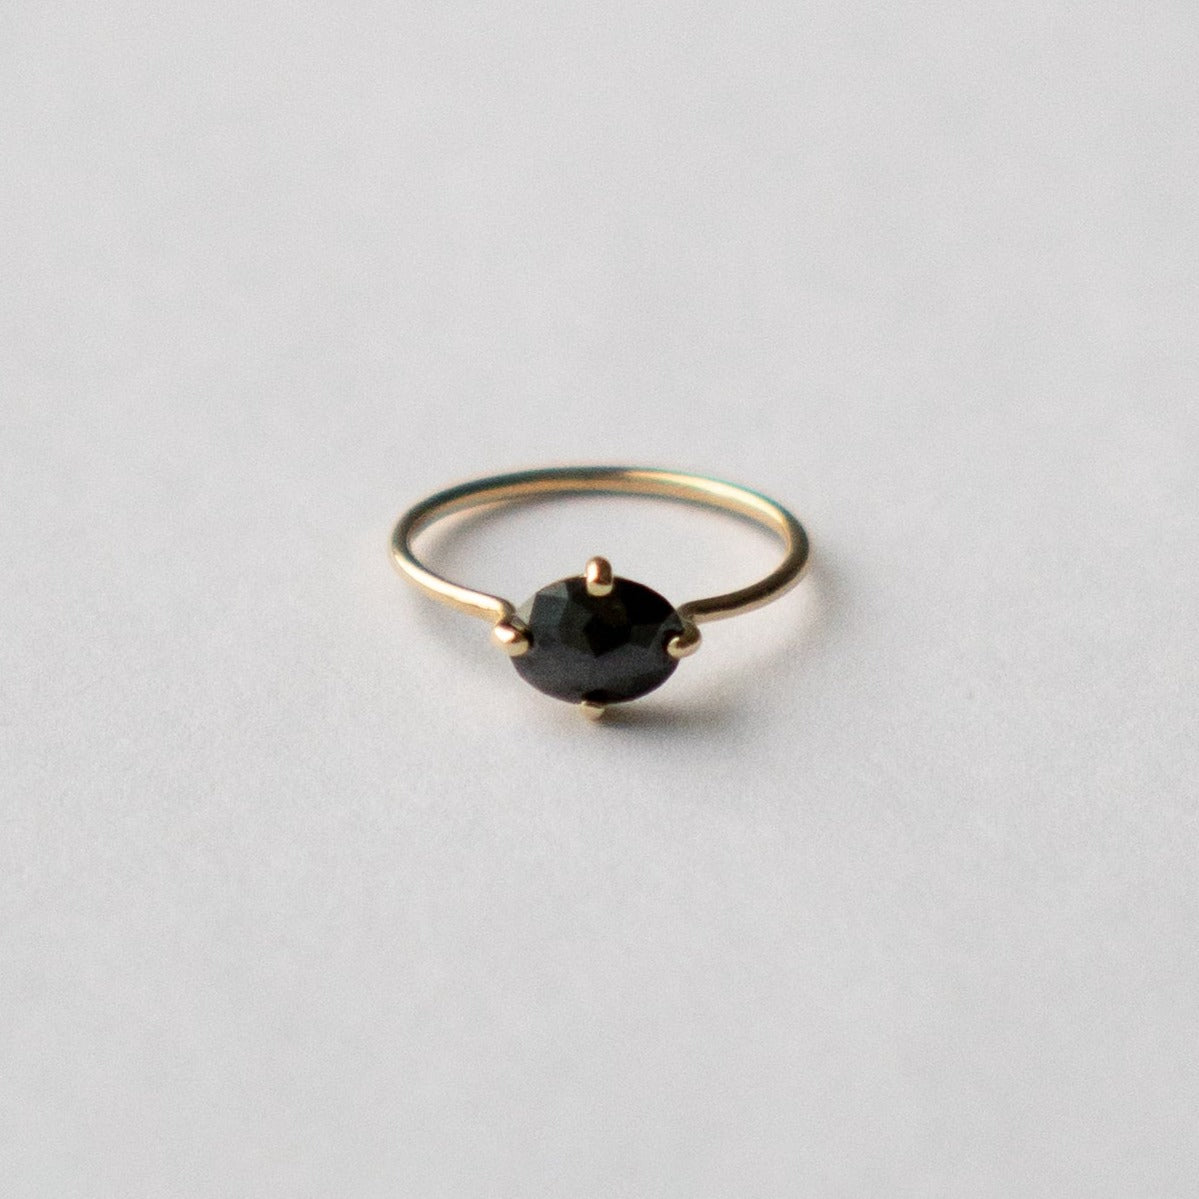 Vera Simple Ring in 14k gold set with a 1.02ct oval rose-cut black diamond by SHW Fine Jewelry NYC